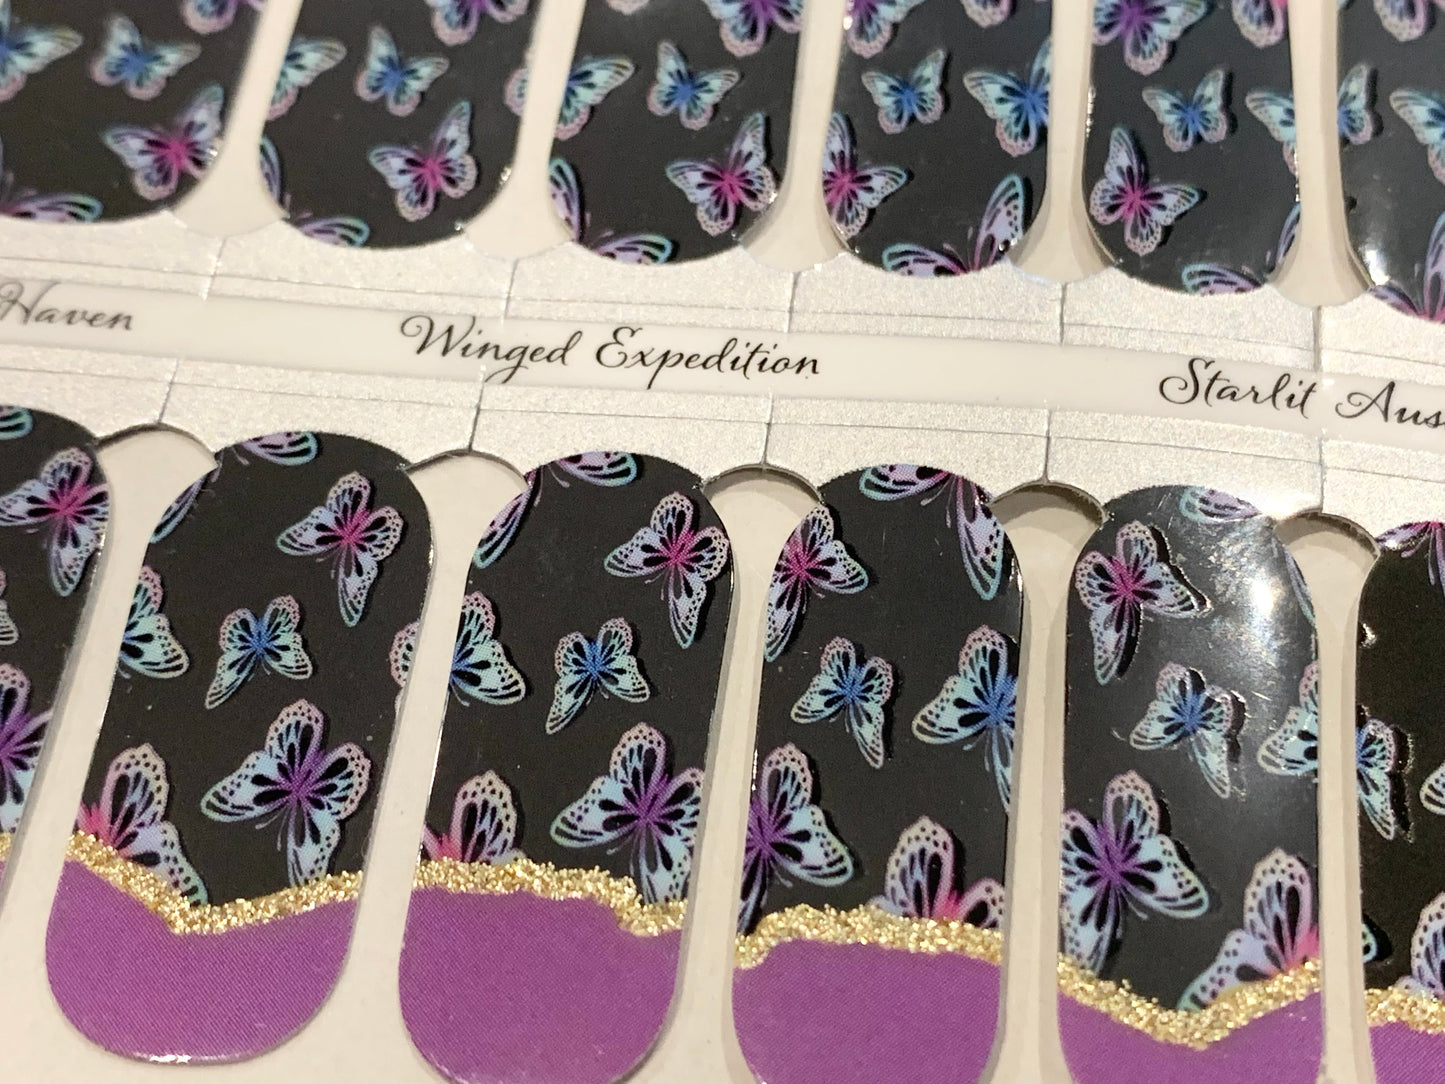 Winged Expedition - Exclusive Starlit & SSH Limited Edition Collab